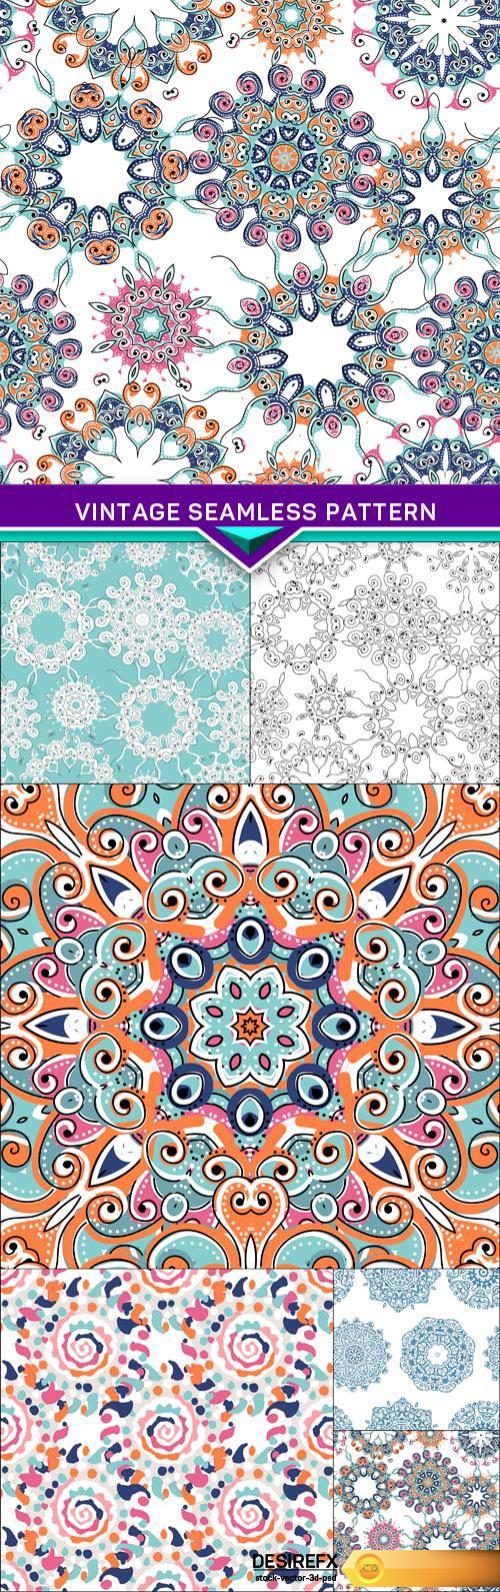 Vintage seamless pattern for your design 6X EPS